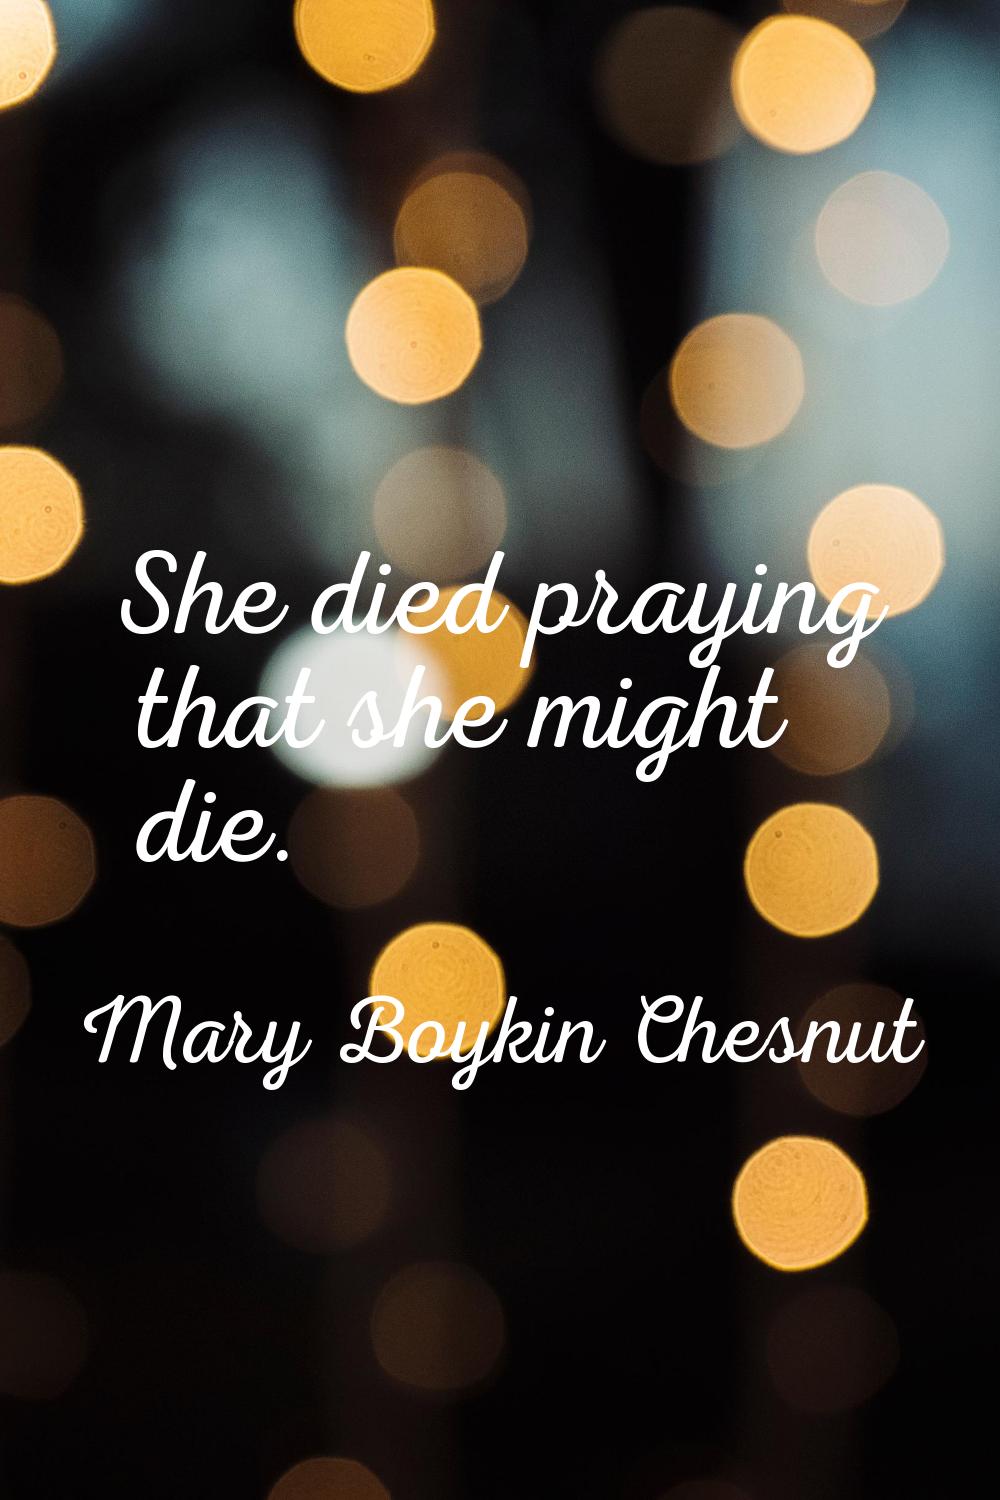 She died praying that she might die.